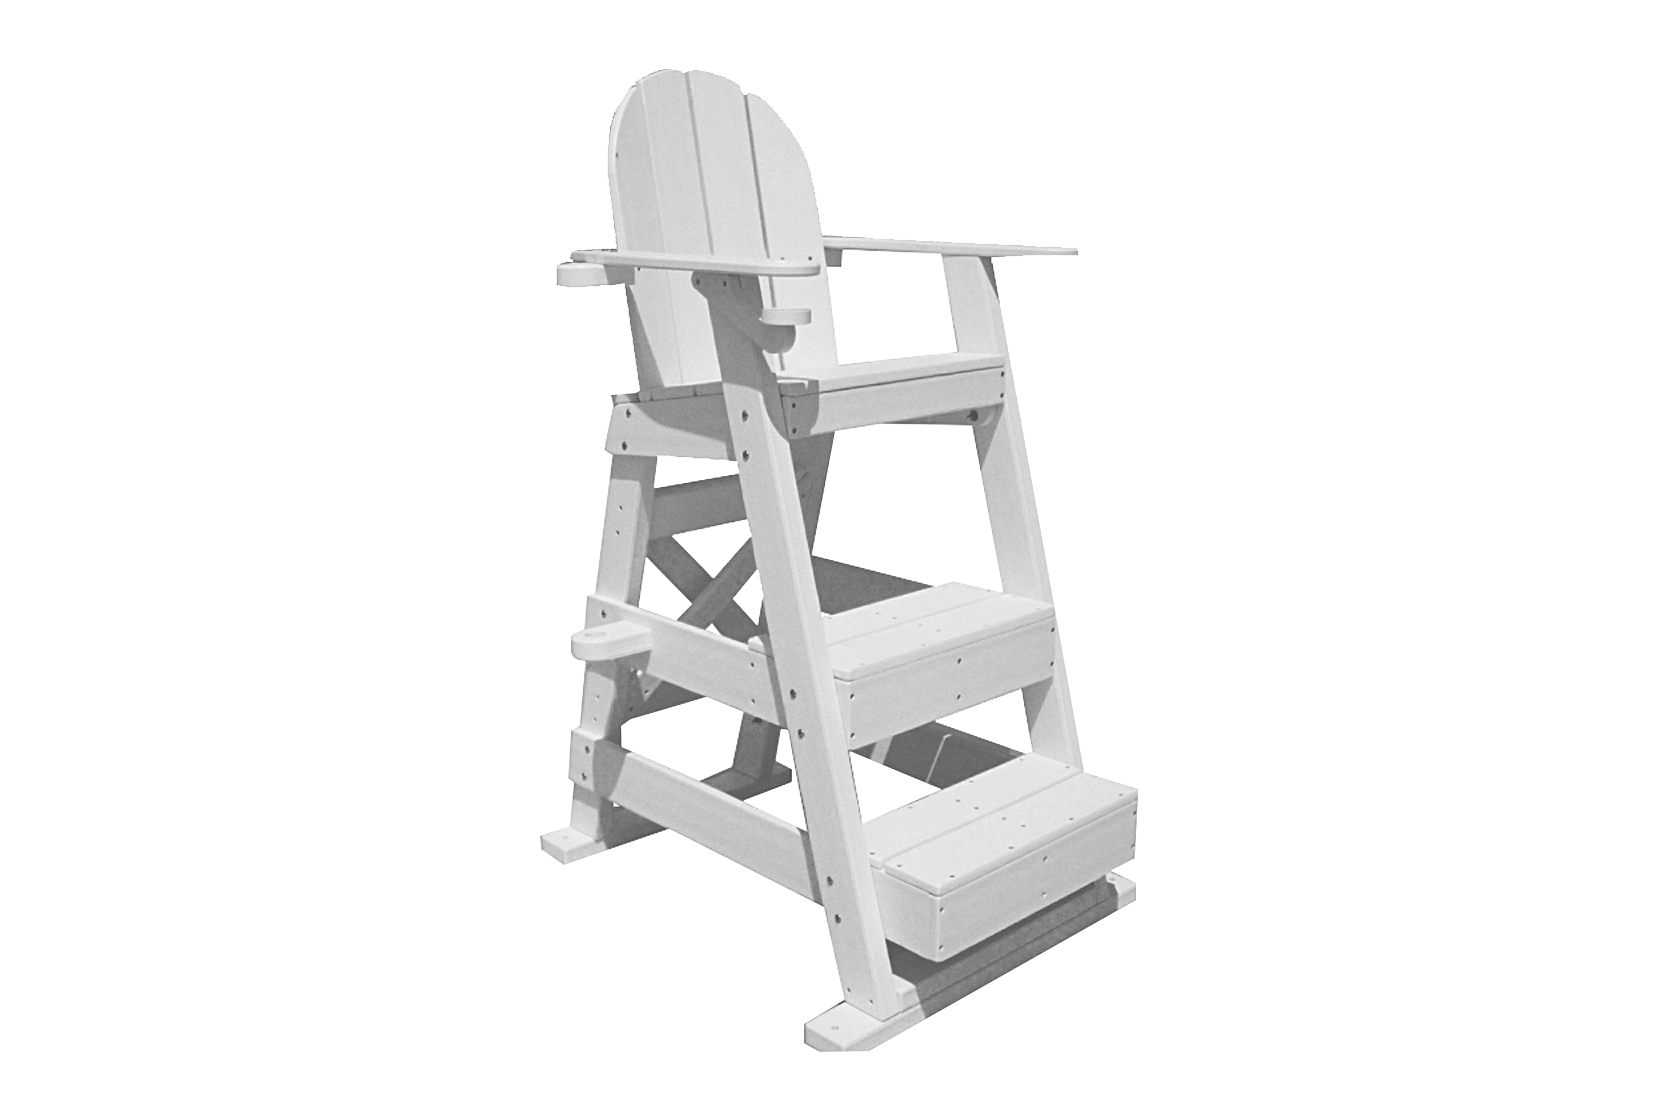 510 Lifeguard Chair - Commercial Recreation Specialists1680 x 1120